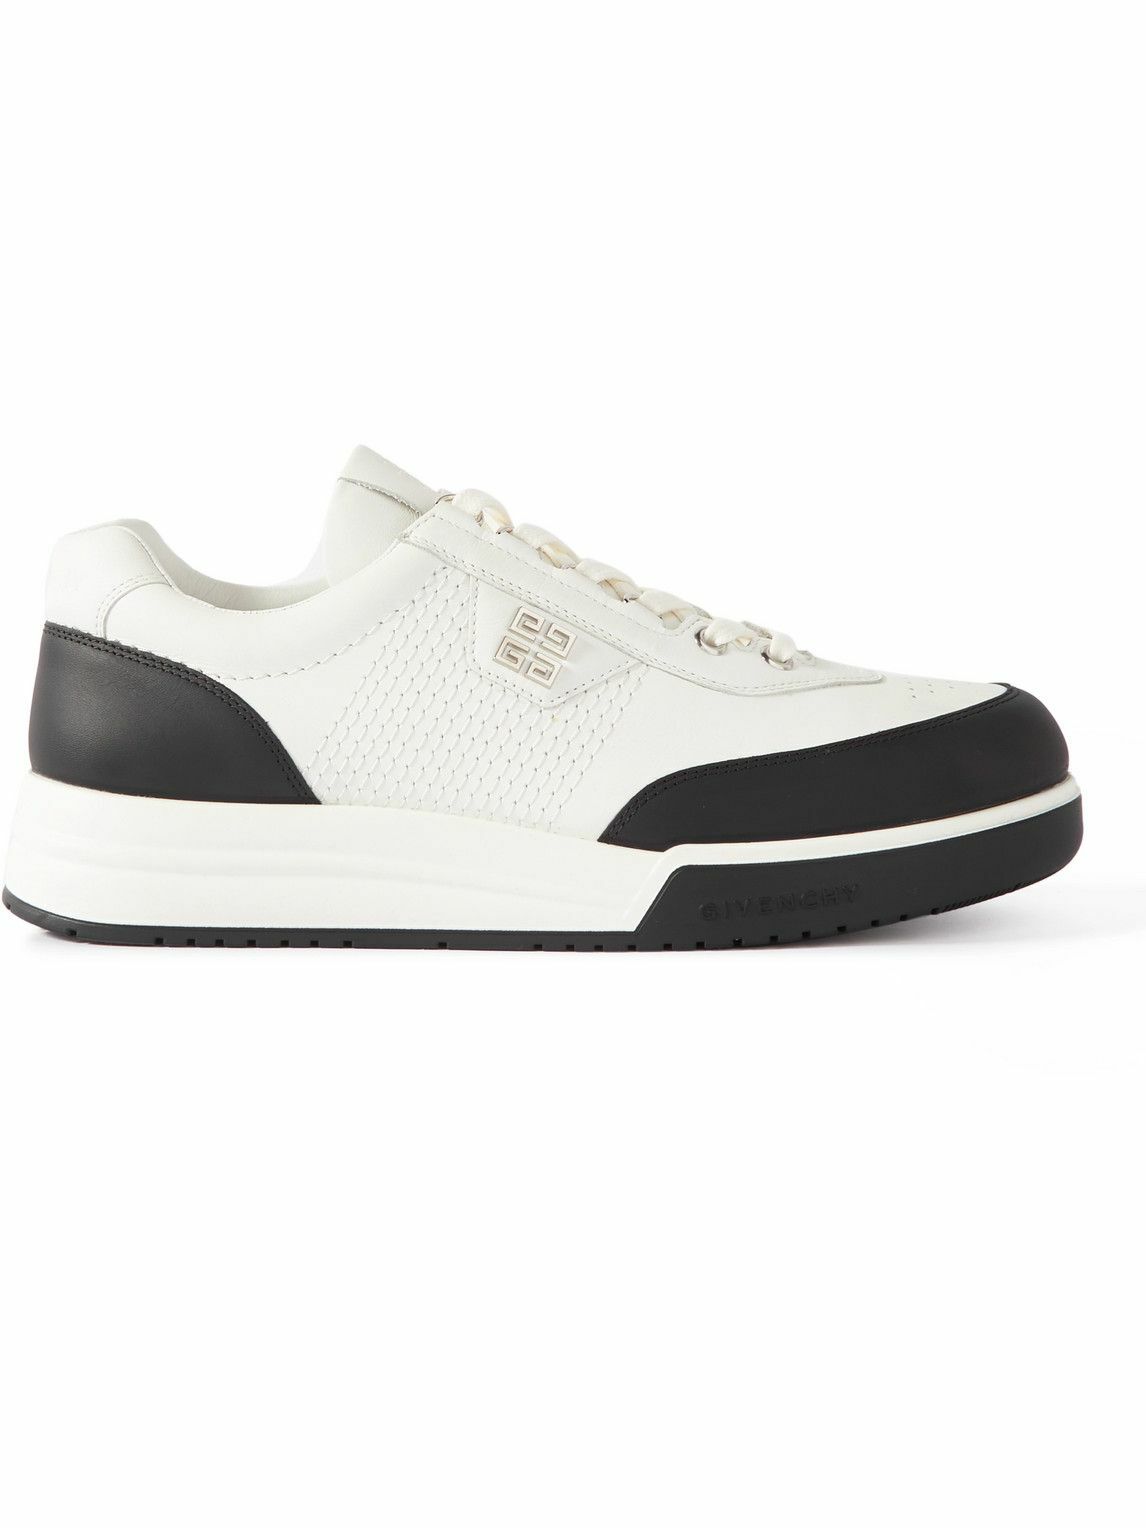 Givenchy - G-4 Logo-Appliquéd Leather Sneakers - White Givenchy